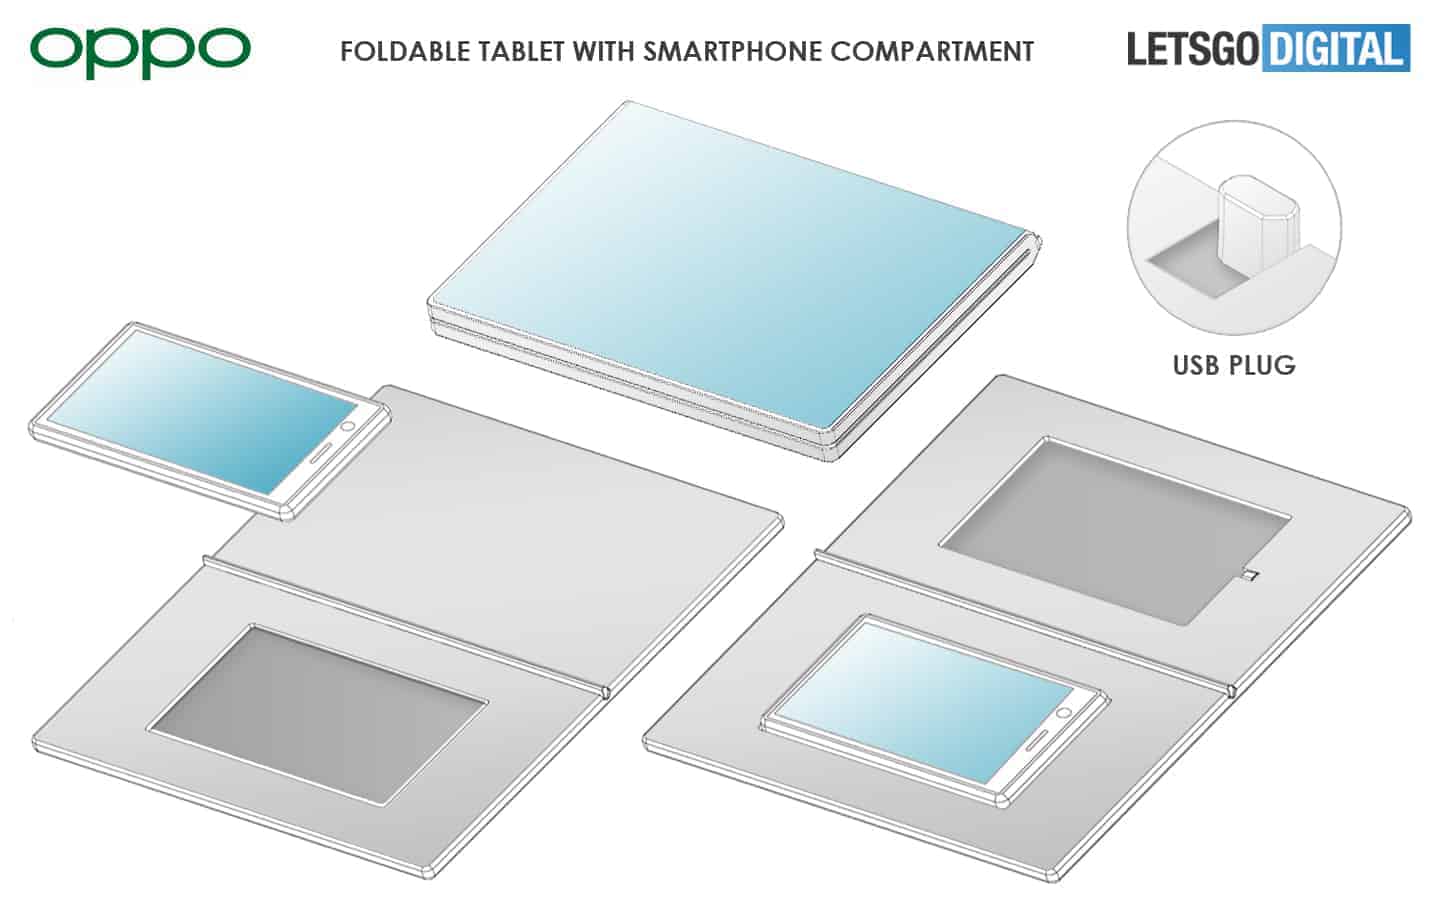 OPPO-foldable-tablet-with-smartphone-dock-patent-4